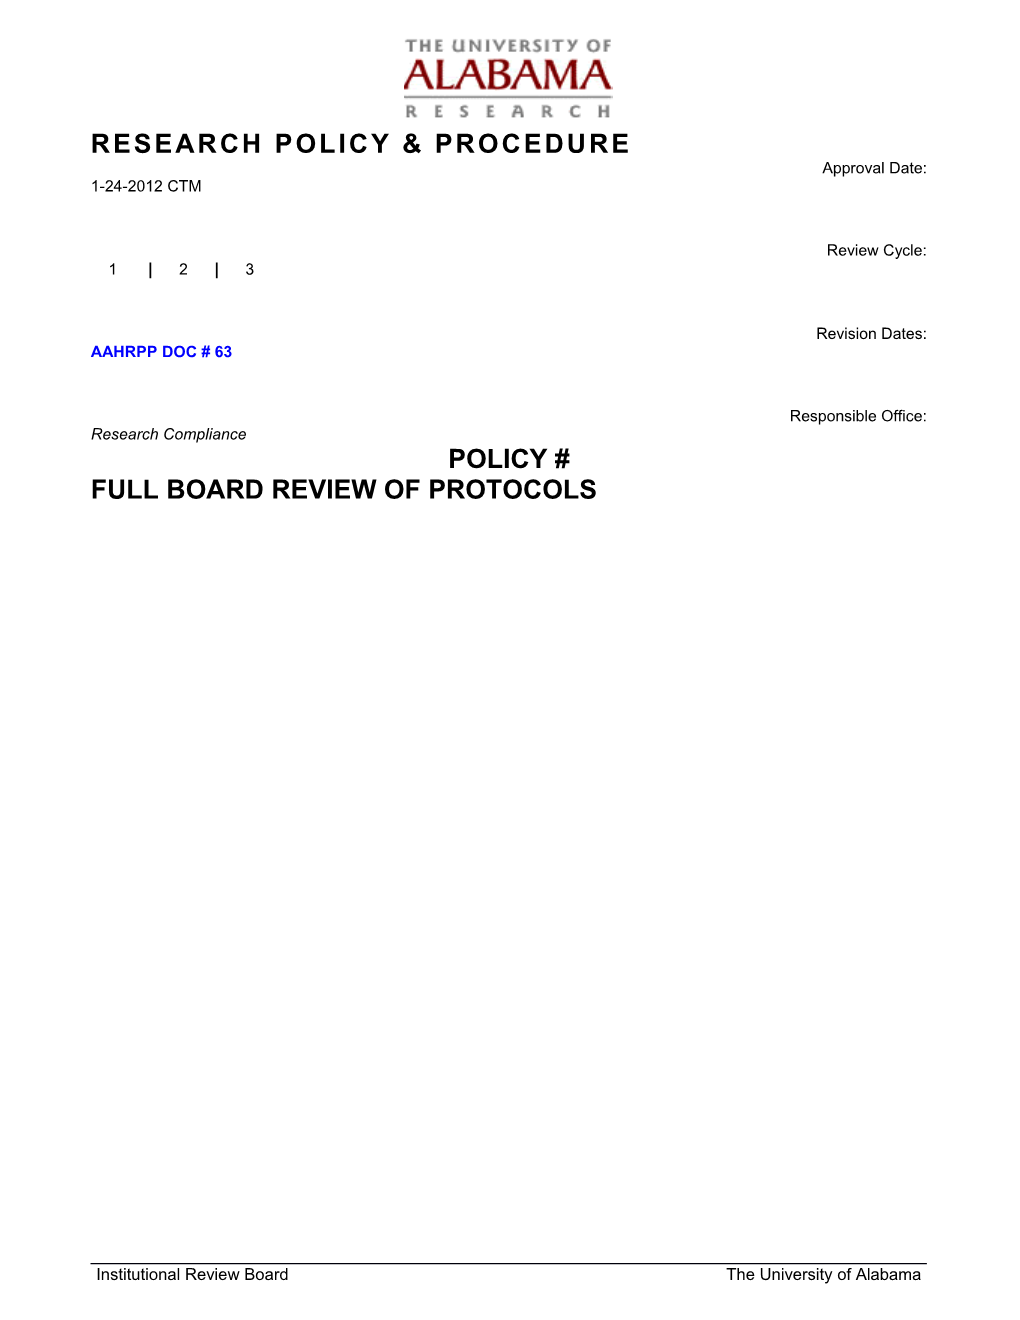 1.1.1All Protocols Submitted for Full Institutional Review Board Review Must Be Received